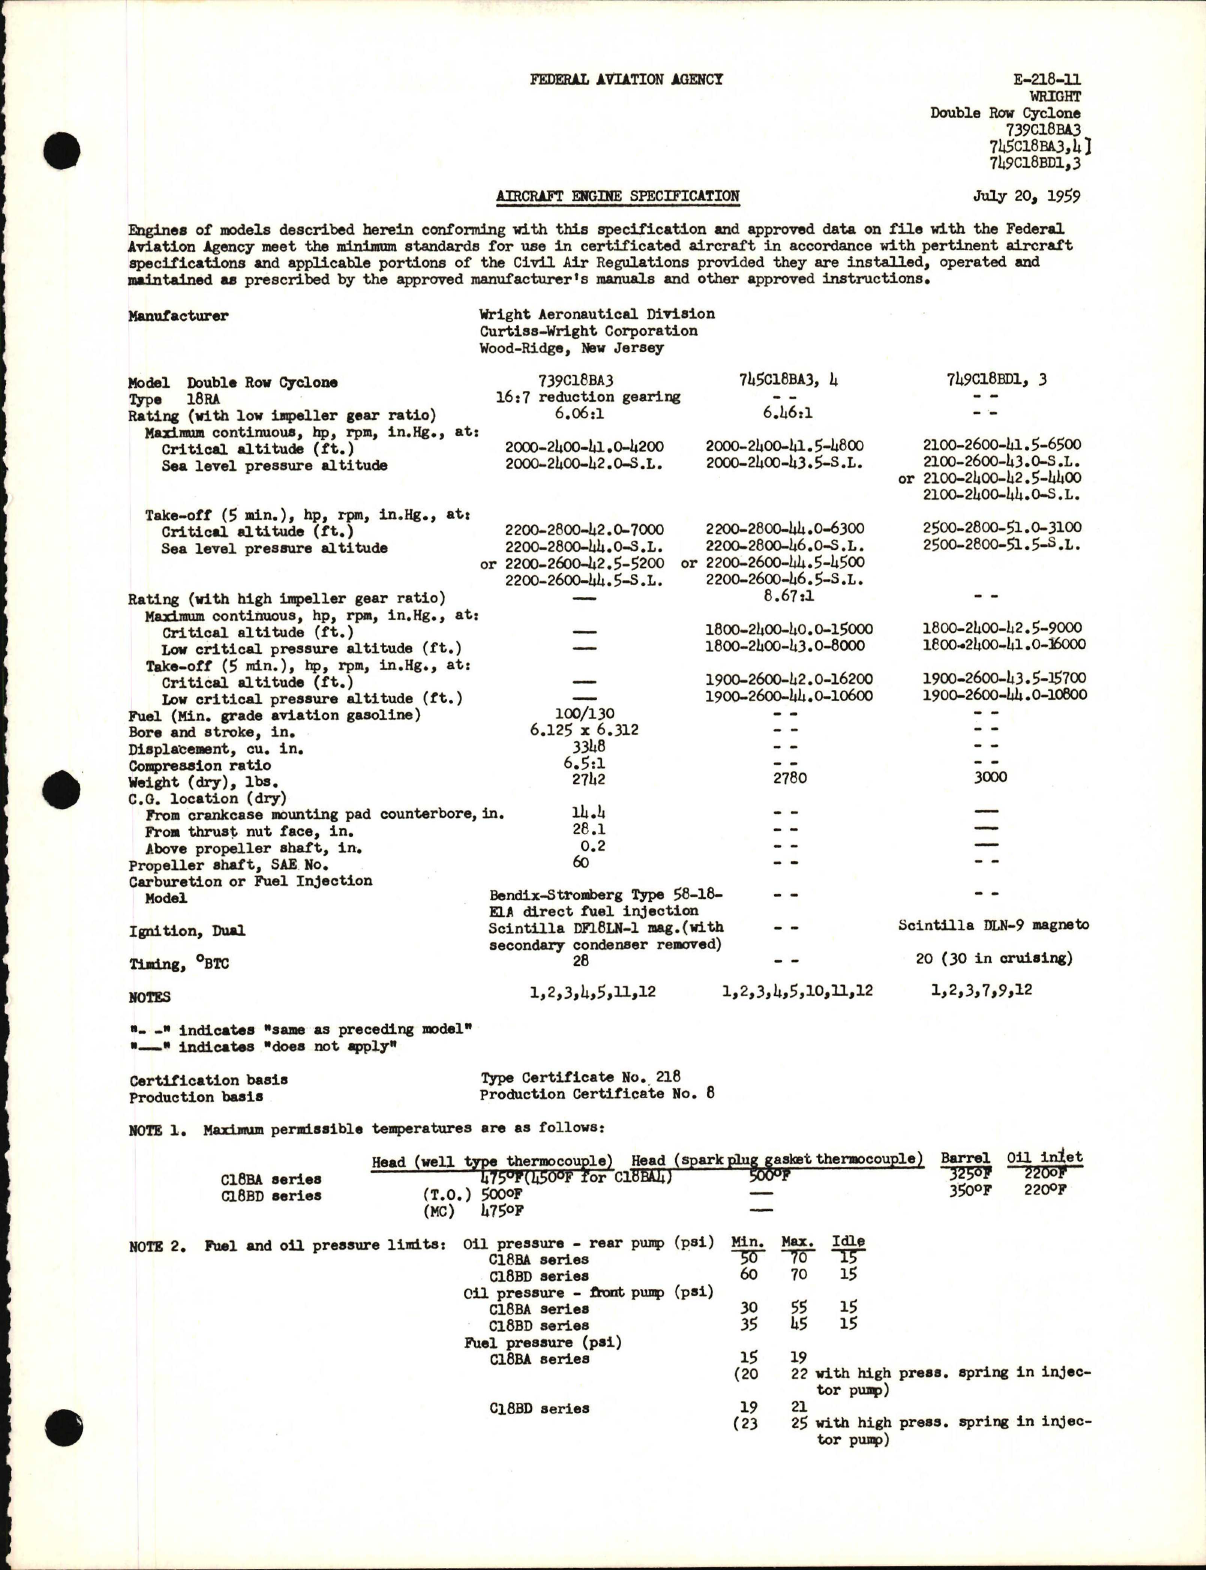 Sample page 1 from AirCorps Library document:  739C18BA3, 745C18BA3, 4, 749C18BD1, and 3 Double Row Cyclone